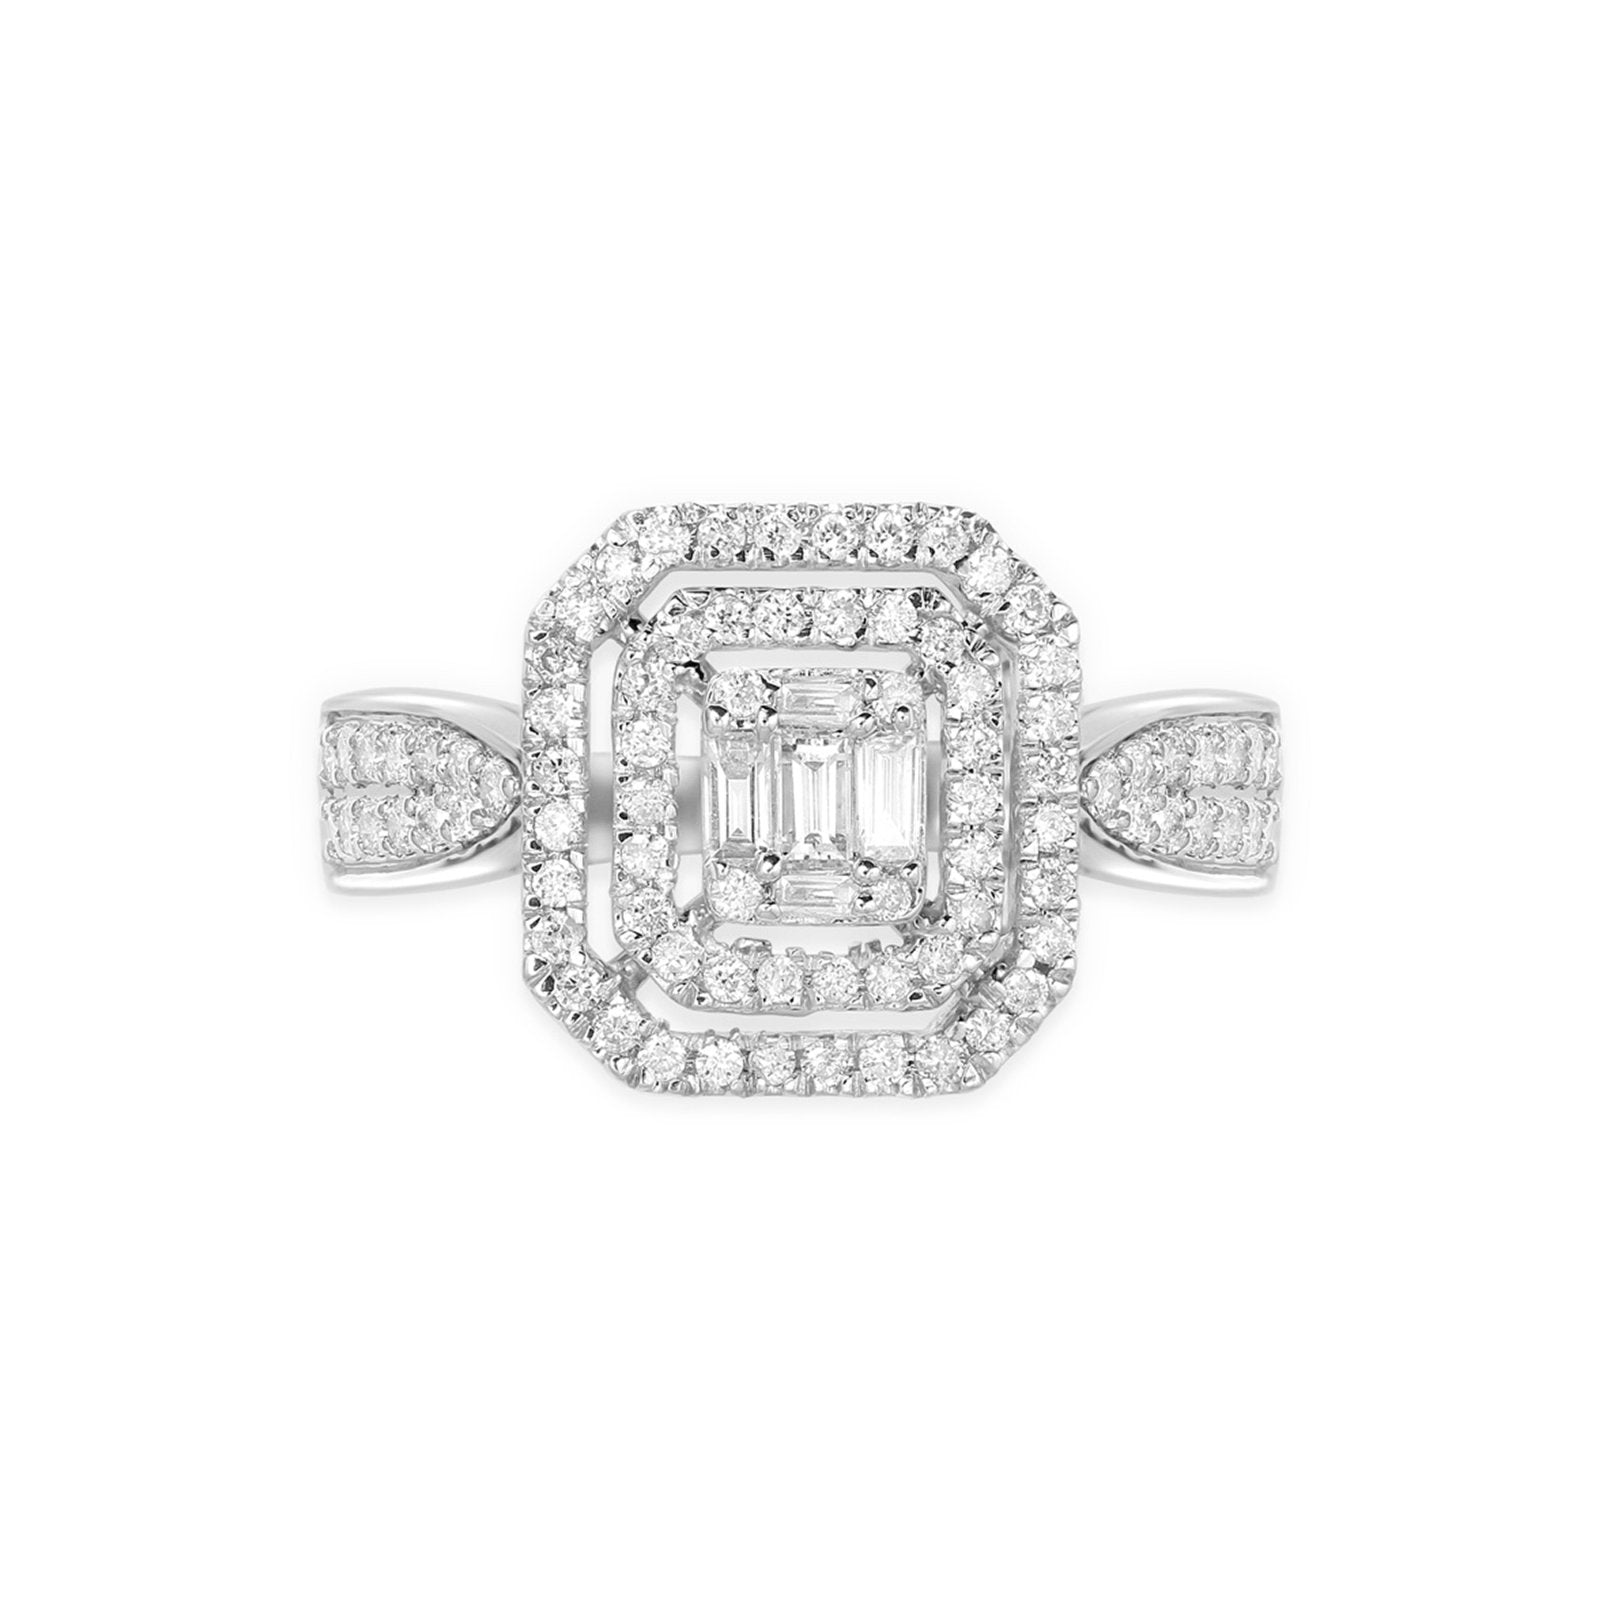 Cushion Cut Mixed Diamond Pave Ring in Solid 18k White Gold Rings Estella Collection #product_description# 17453 18k Diamond Engagement Ring #tag4# #tag5# #tag6# #tag7# #tag8# #tag9# #tag10# 6